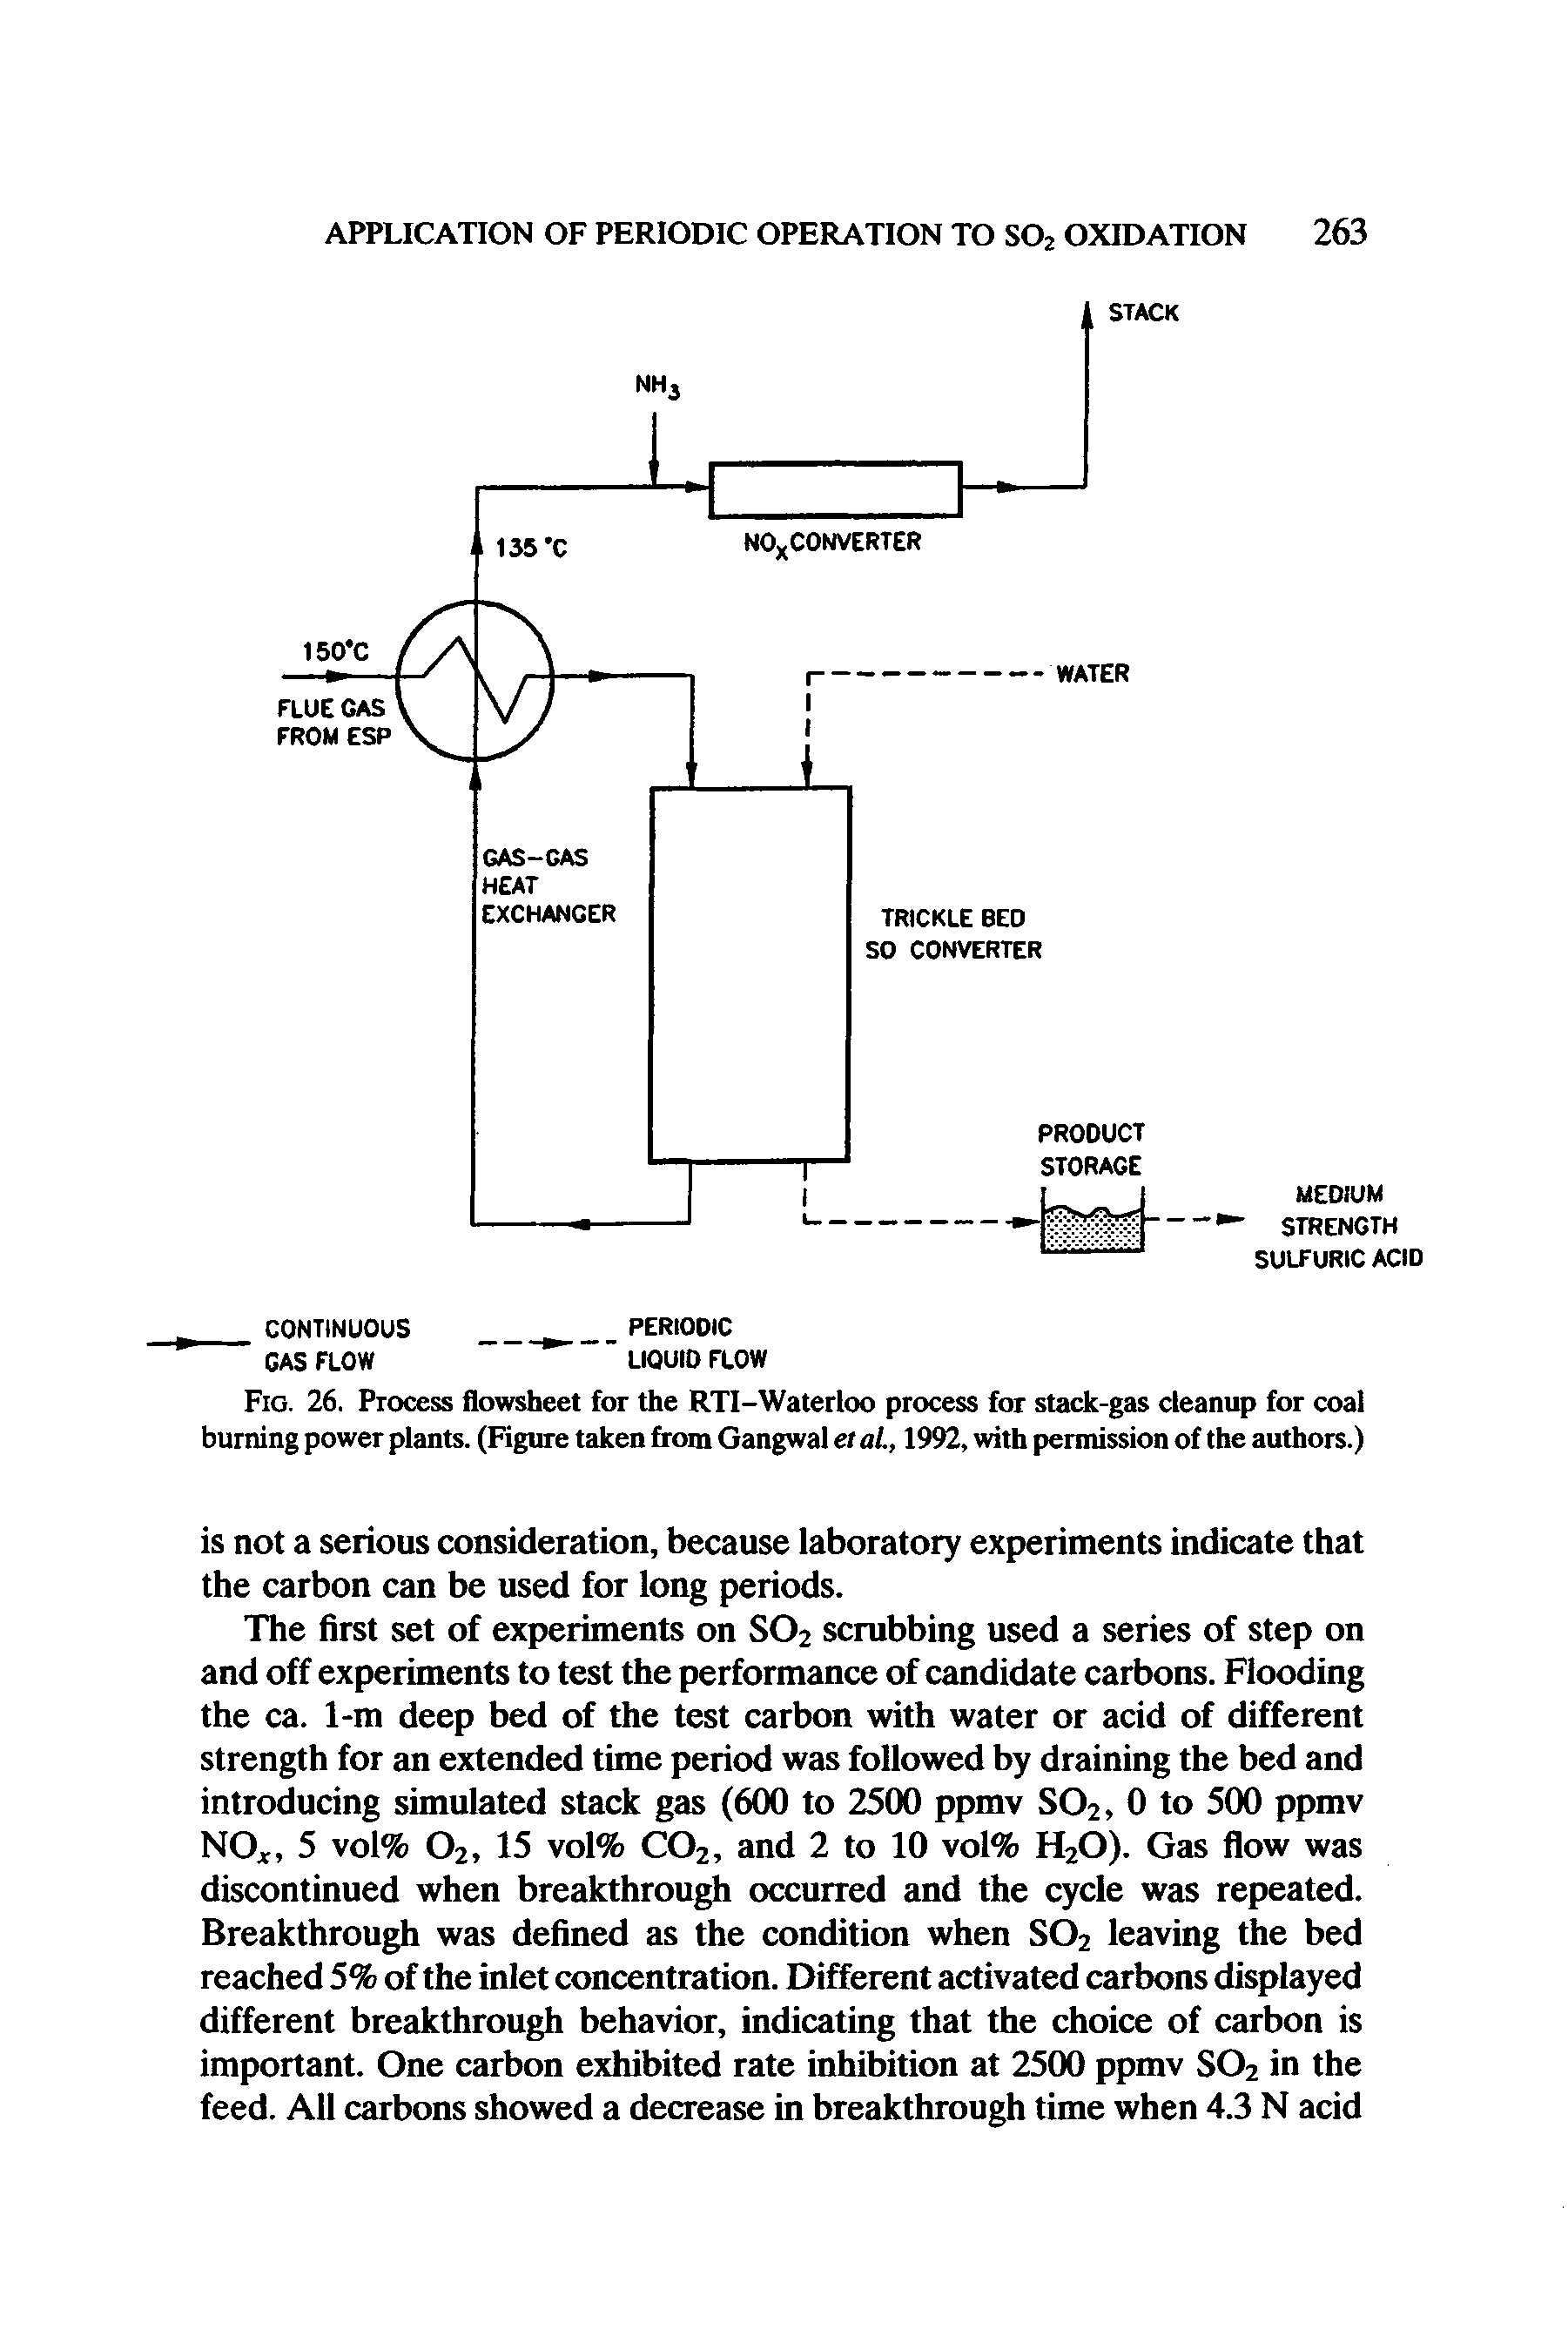 Fig. 26. Process flowsheet for the RTI-Waterloo process for stack-gas cleanup for coal burning power plants. (Figure taken from Gangwal et al., 1992, with permission of the authors.)...